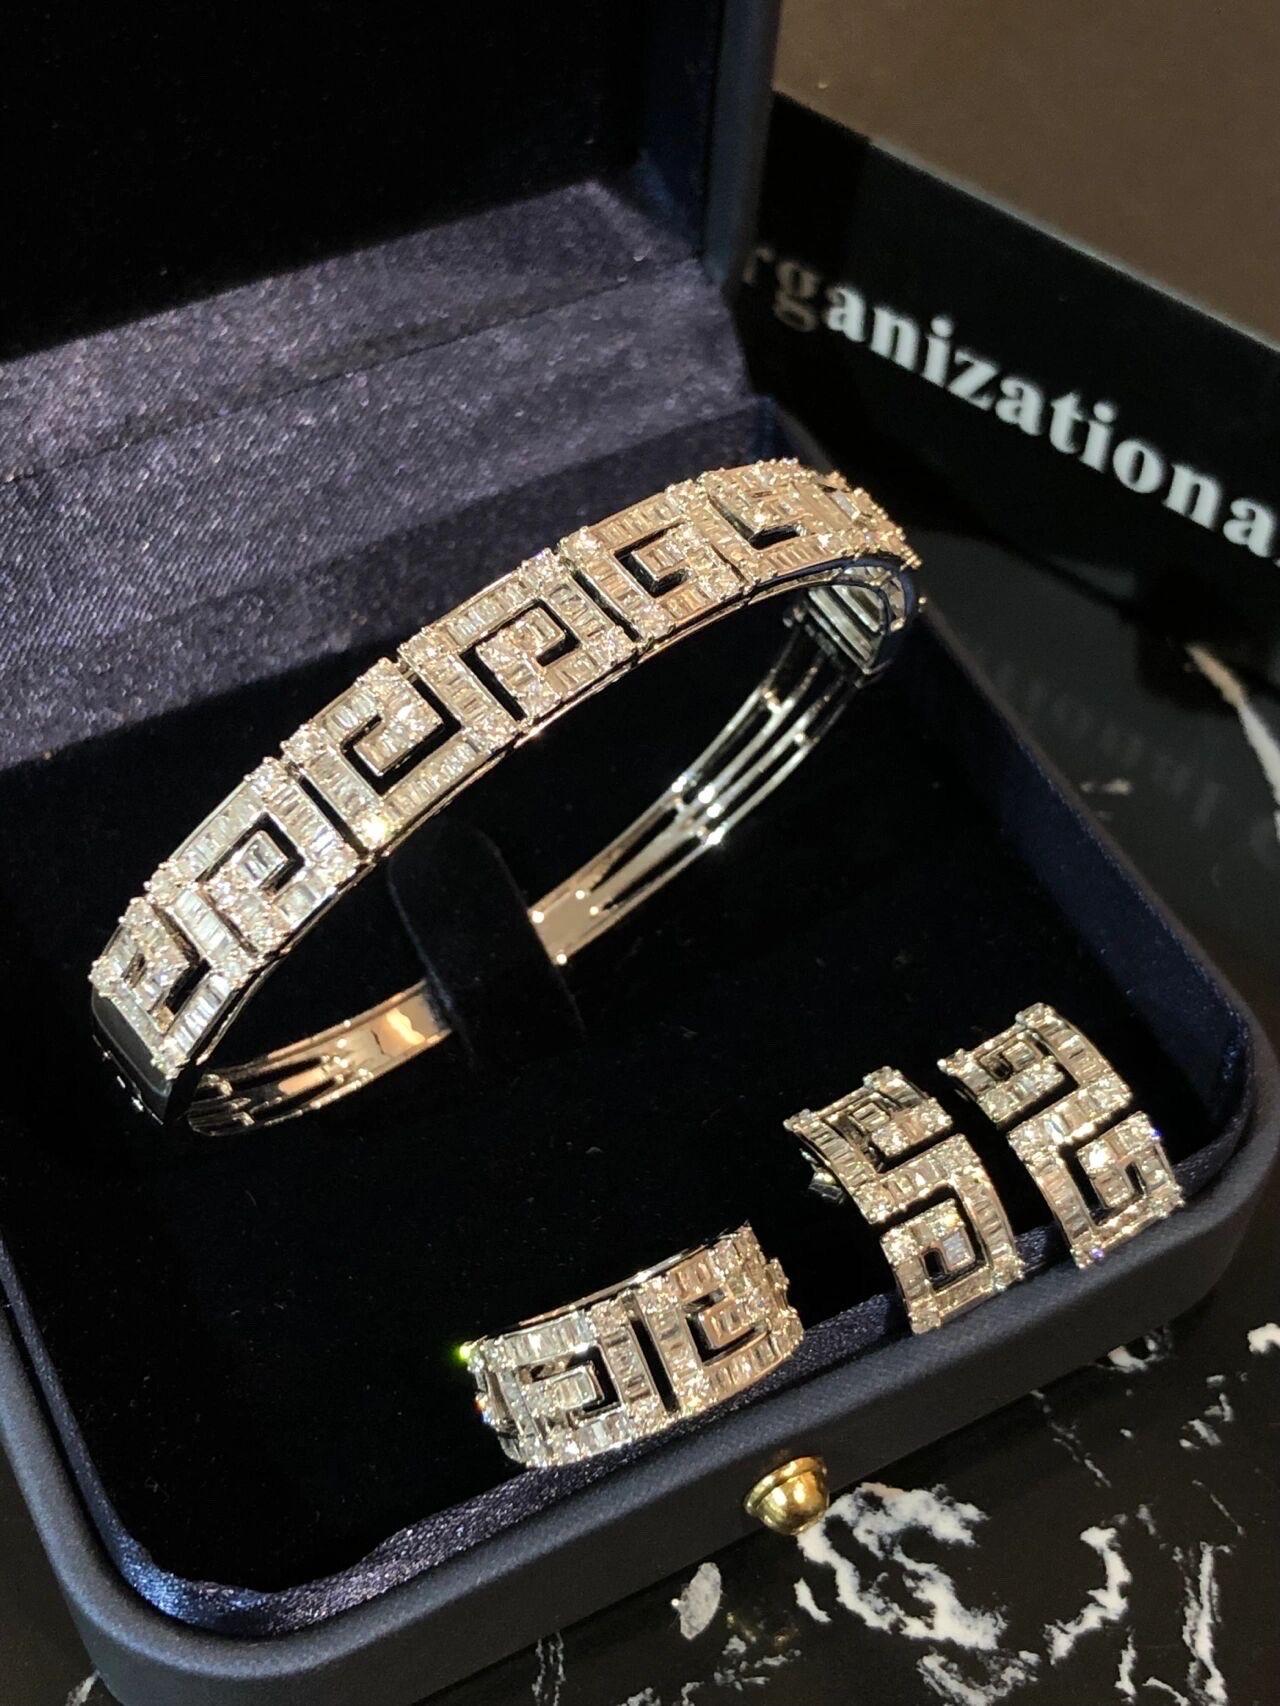 luxury light luxury ladder square bracelet 18k gold inlaid with diamonds women's diamond jewelry popular accessories

 T-square diamond pavé, high-quality diamonds are white and flashy with clothes. A set of cost-effective and stylish jewelry
18K